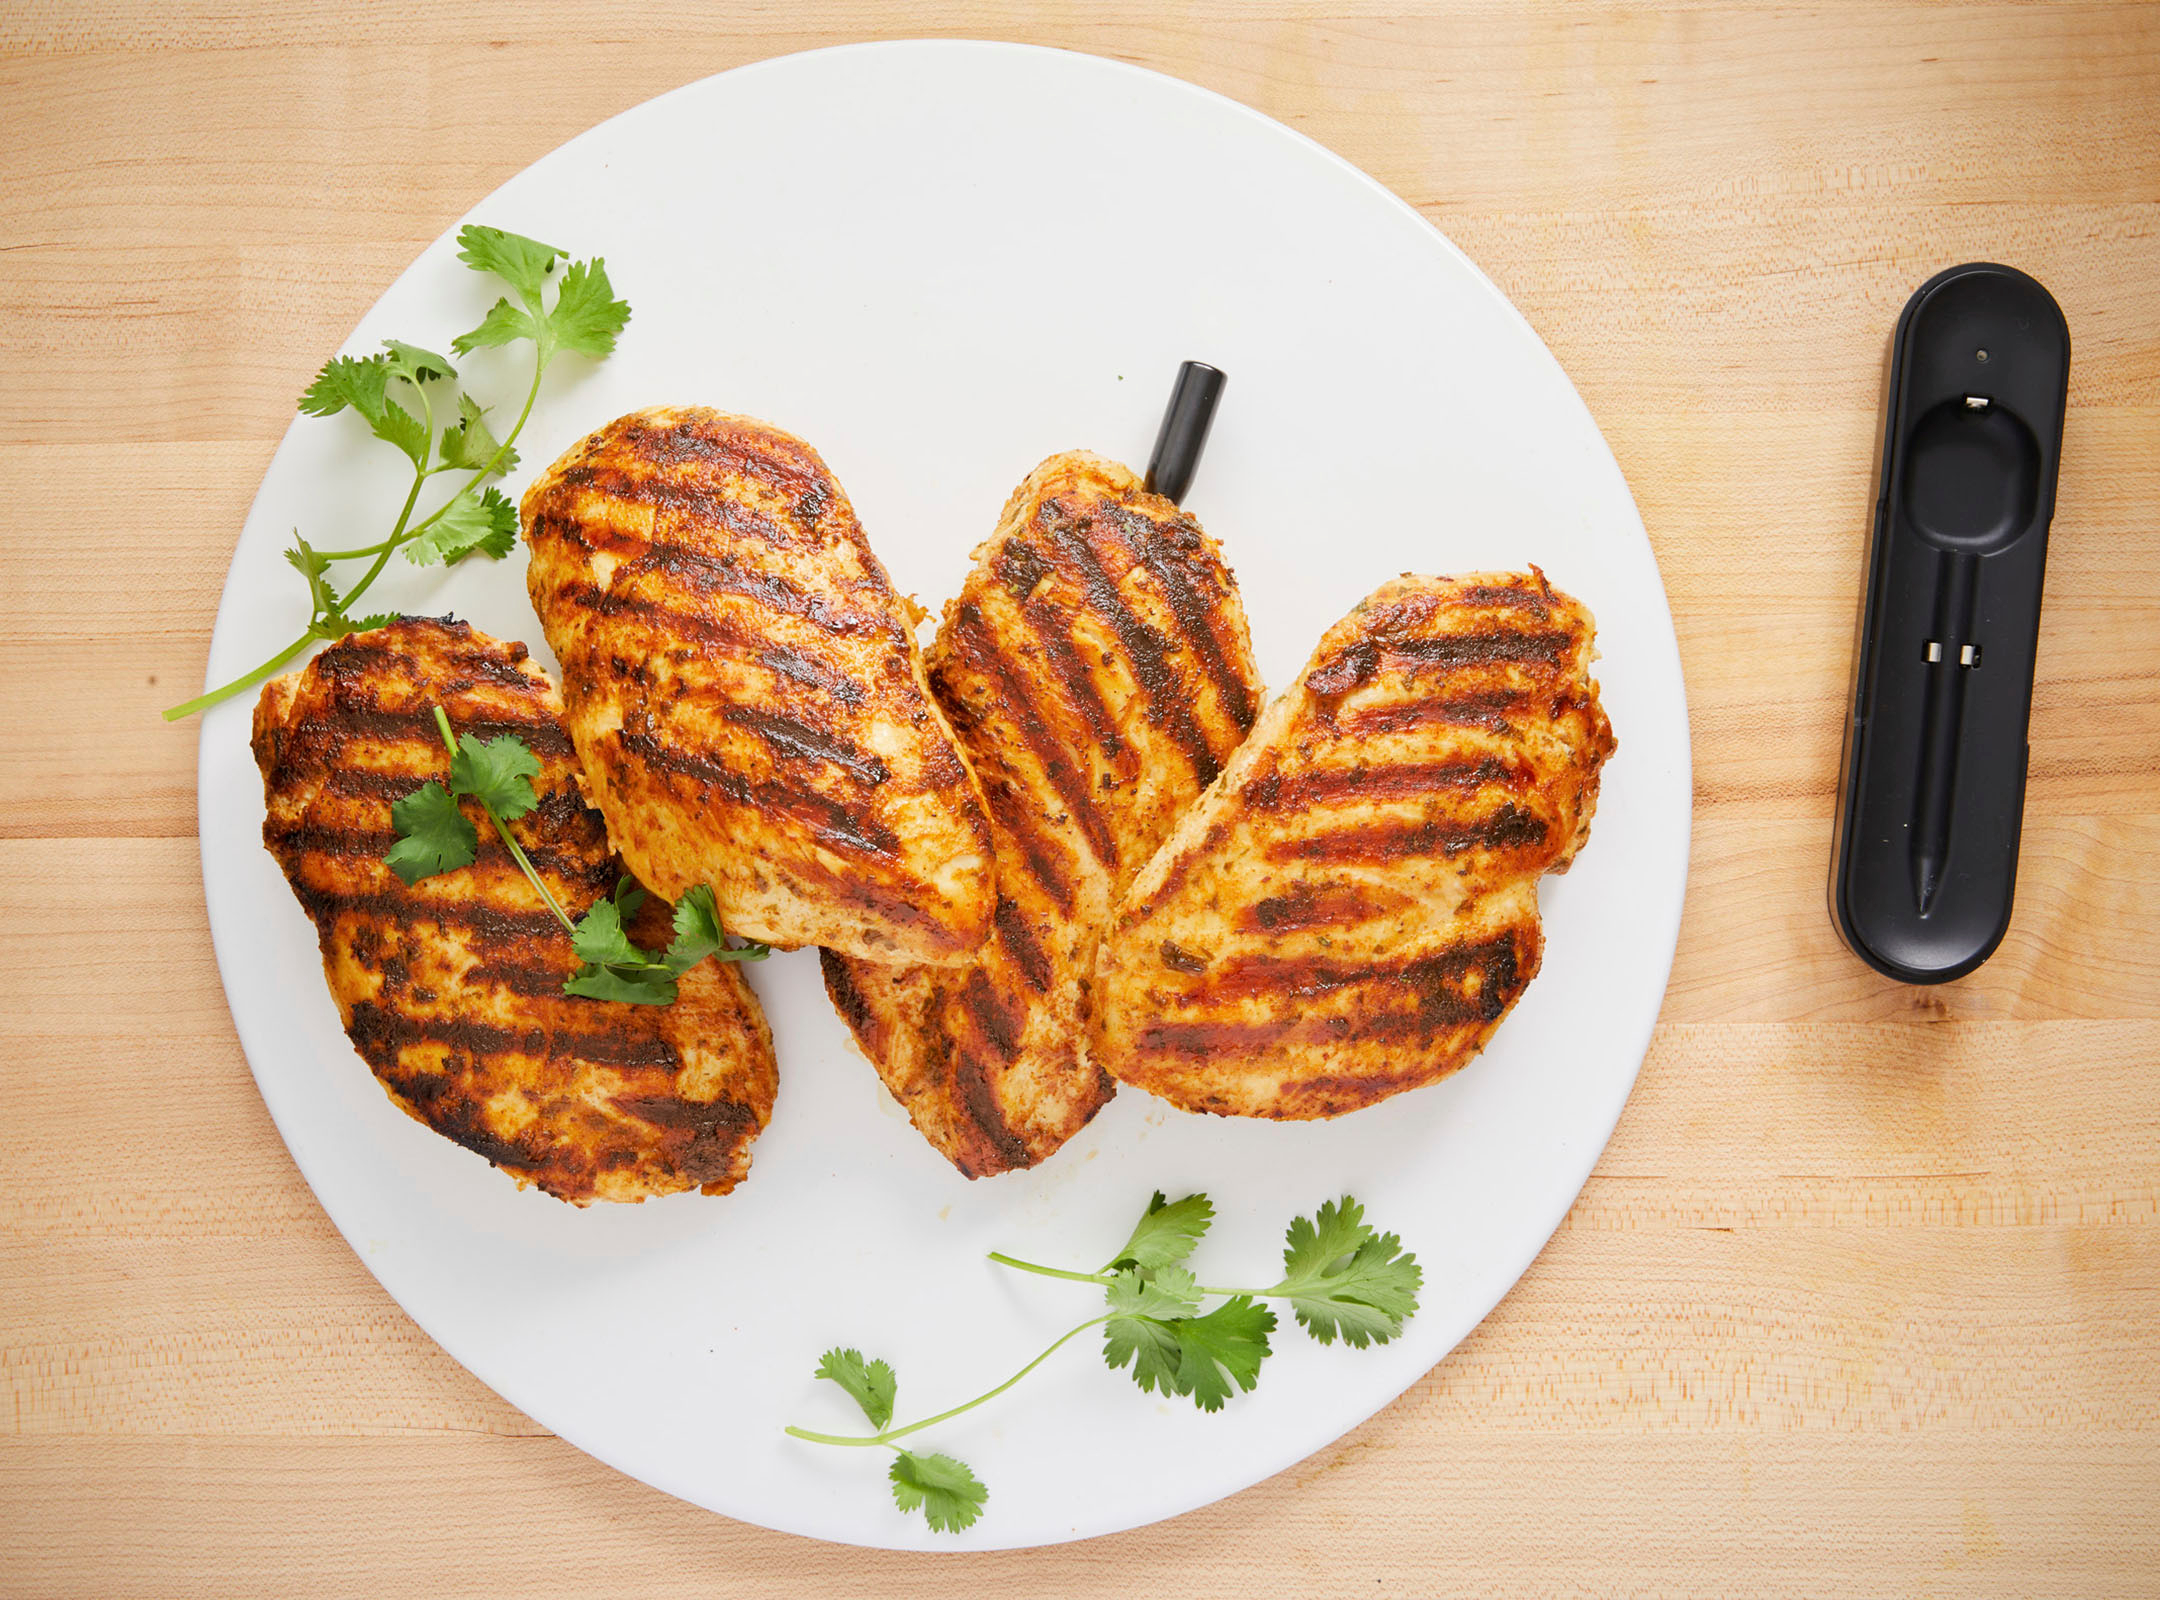 Review: Yummly smart thermometer cooked chicken perfectly - Gearbrain